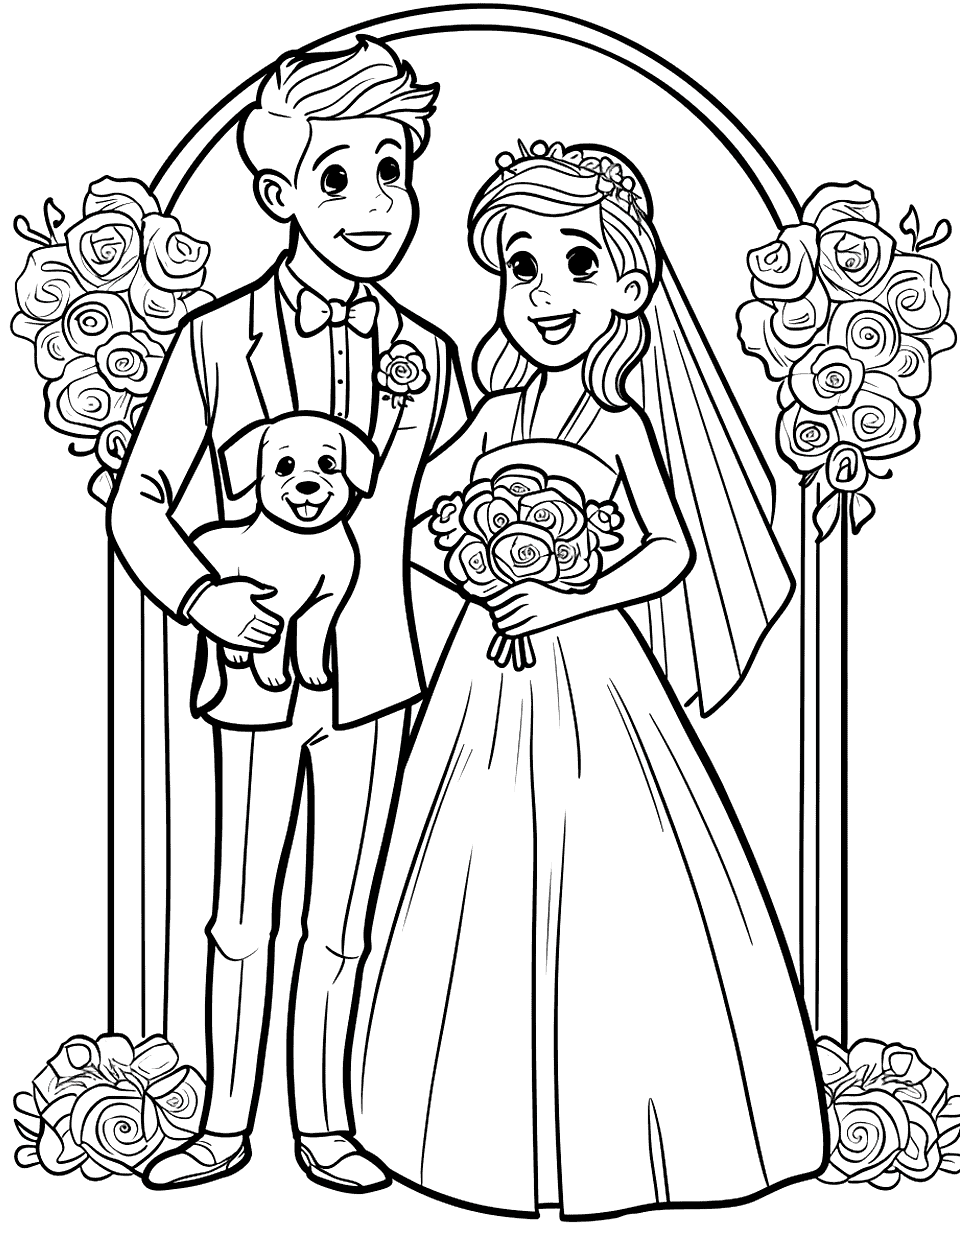 Precious Moments with Pets Wedding Coloring Page - A bride and groom posing with their dog.